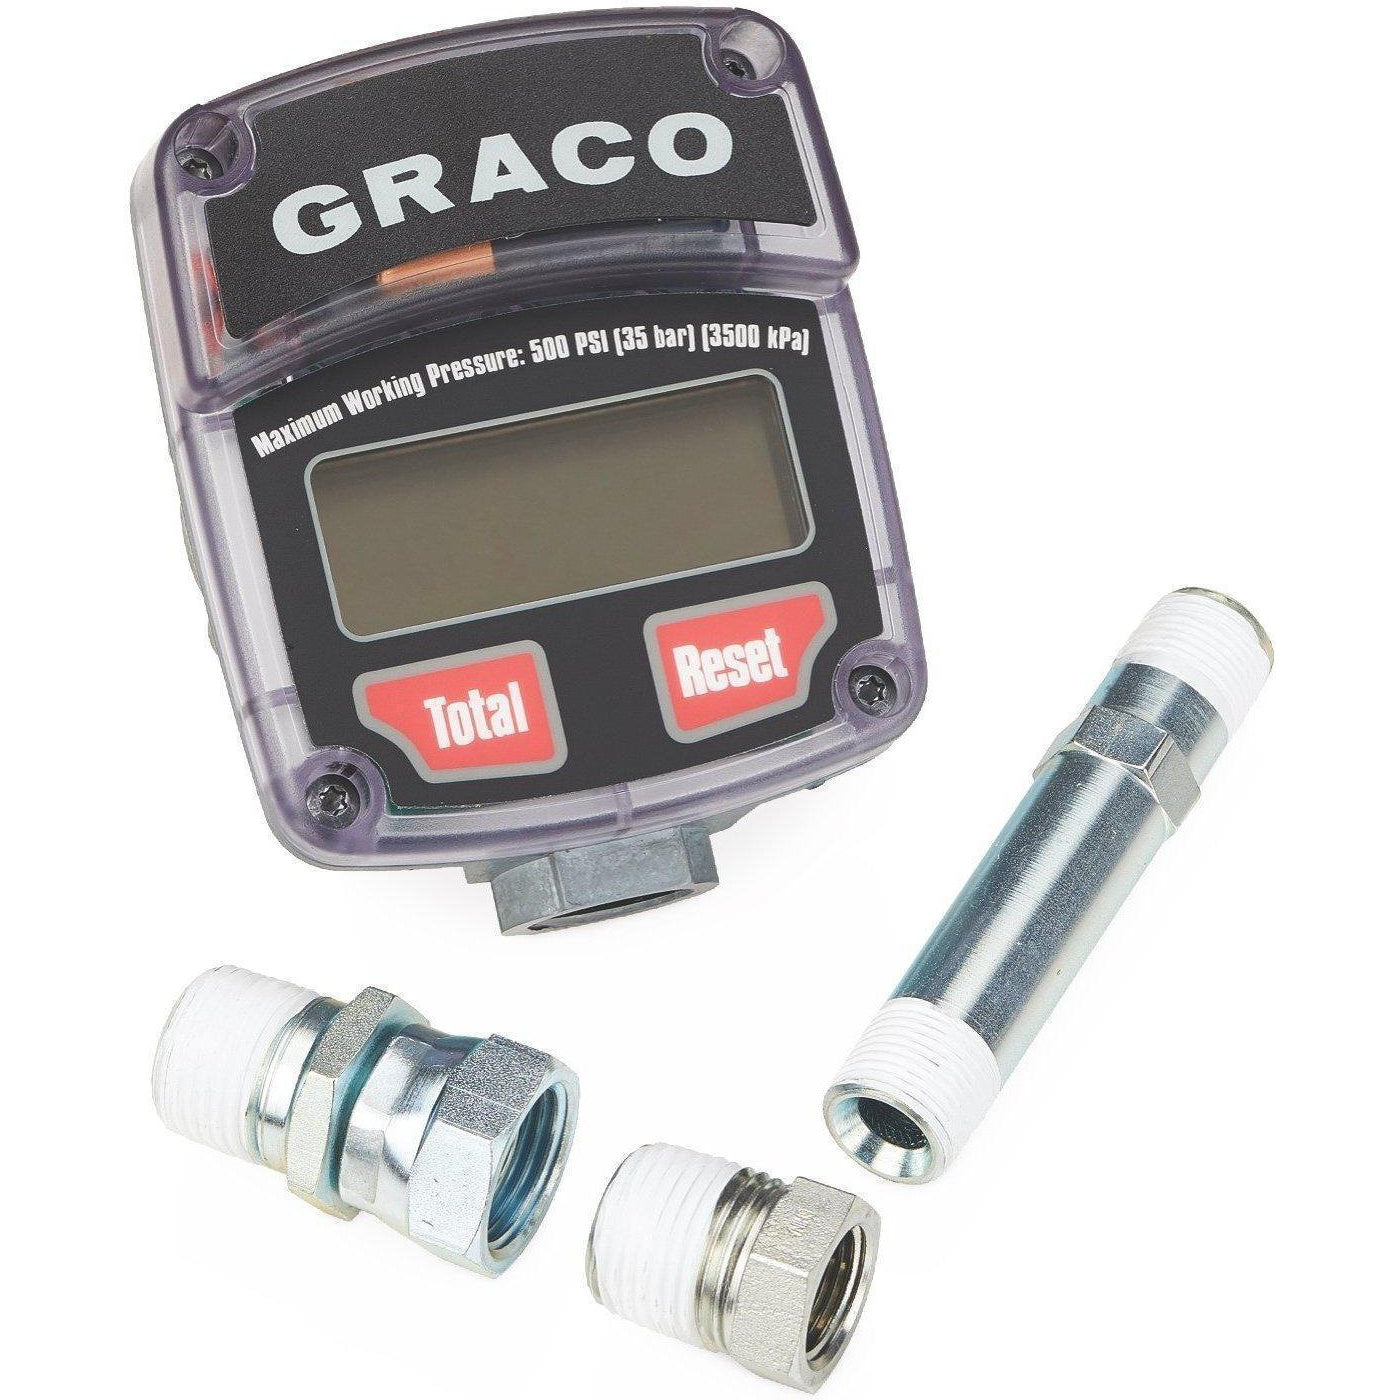 Graco 239706 Meter Kit For Adding Im5 Electronic Totalizing Meter To Dispensevalve. Reads In Gallons, Quarts, Pints And Liters. - Fireball Equipment Ltd.